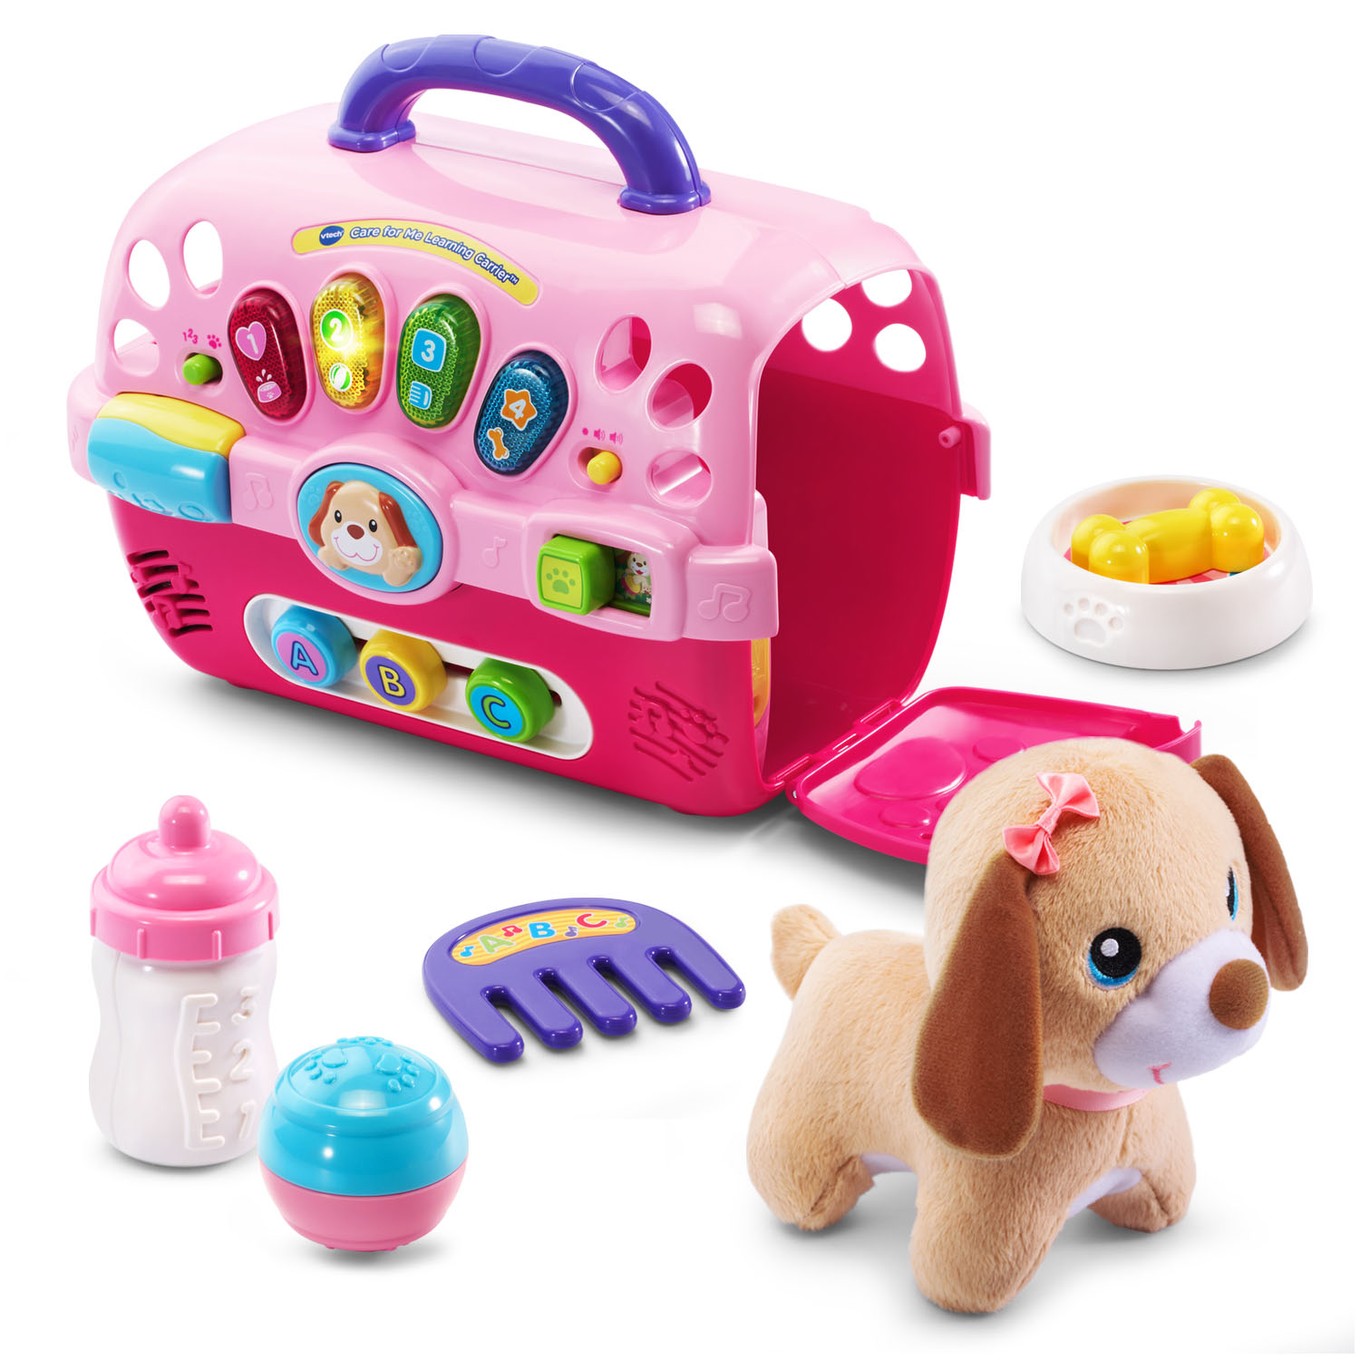 vtech learning toys for 4 year olds